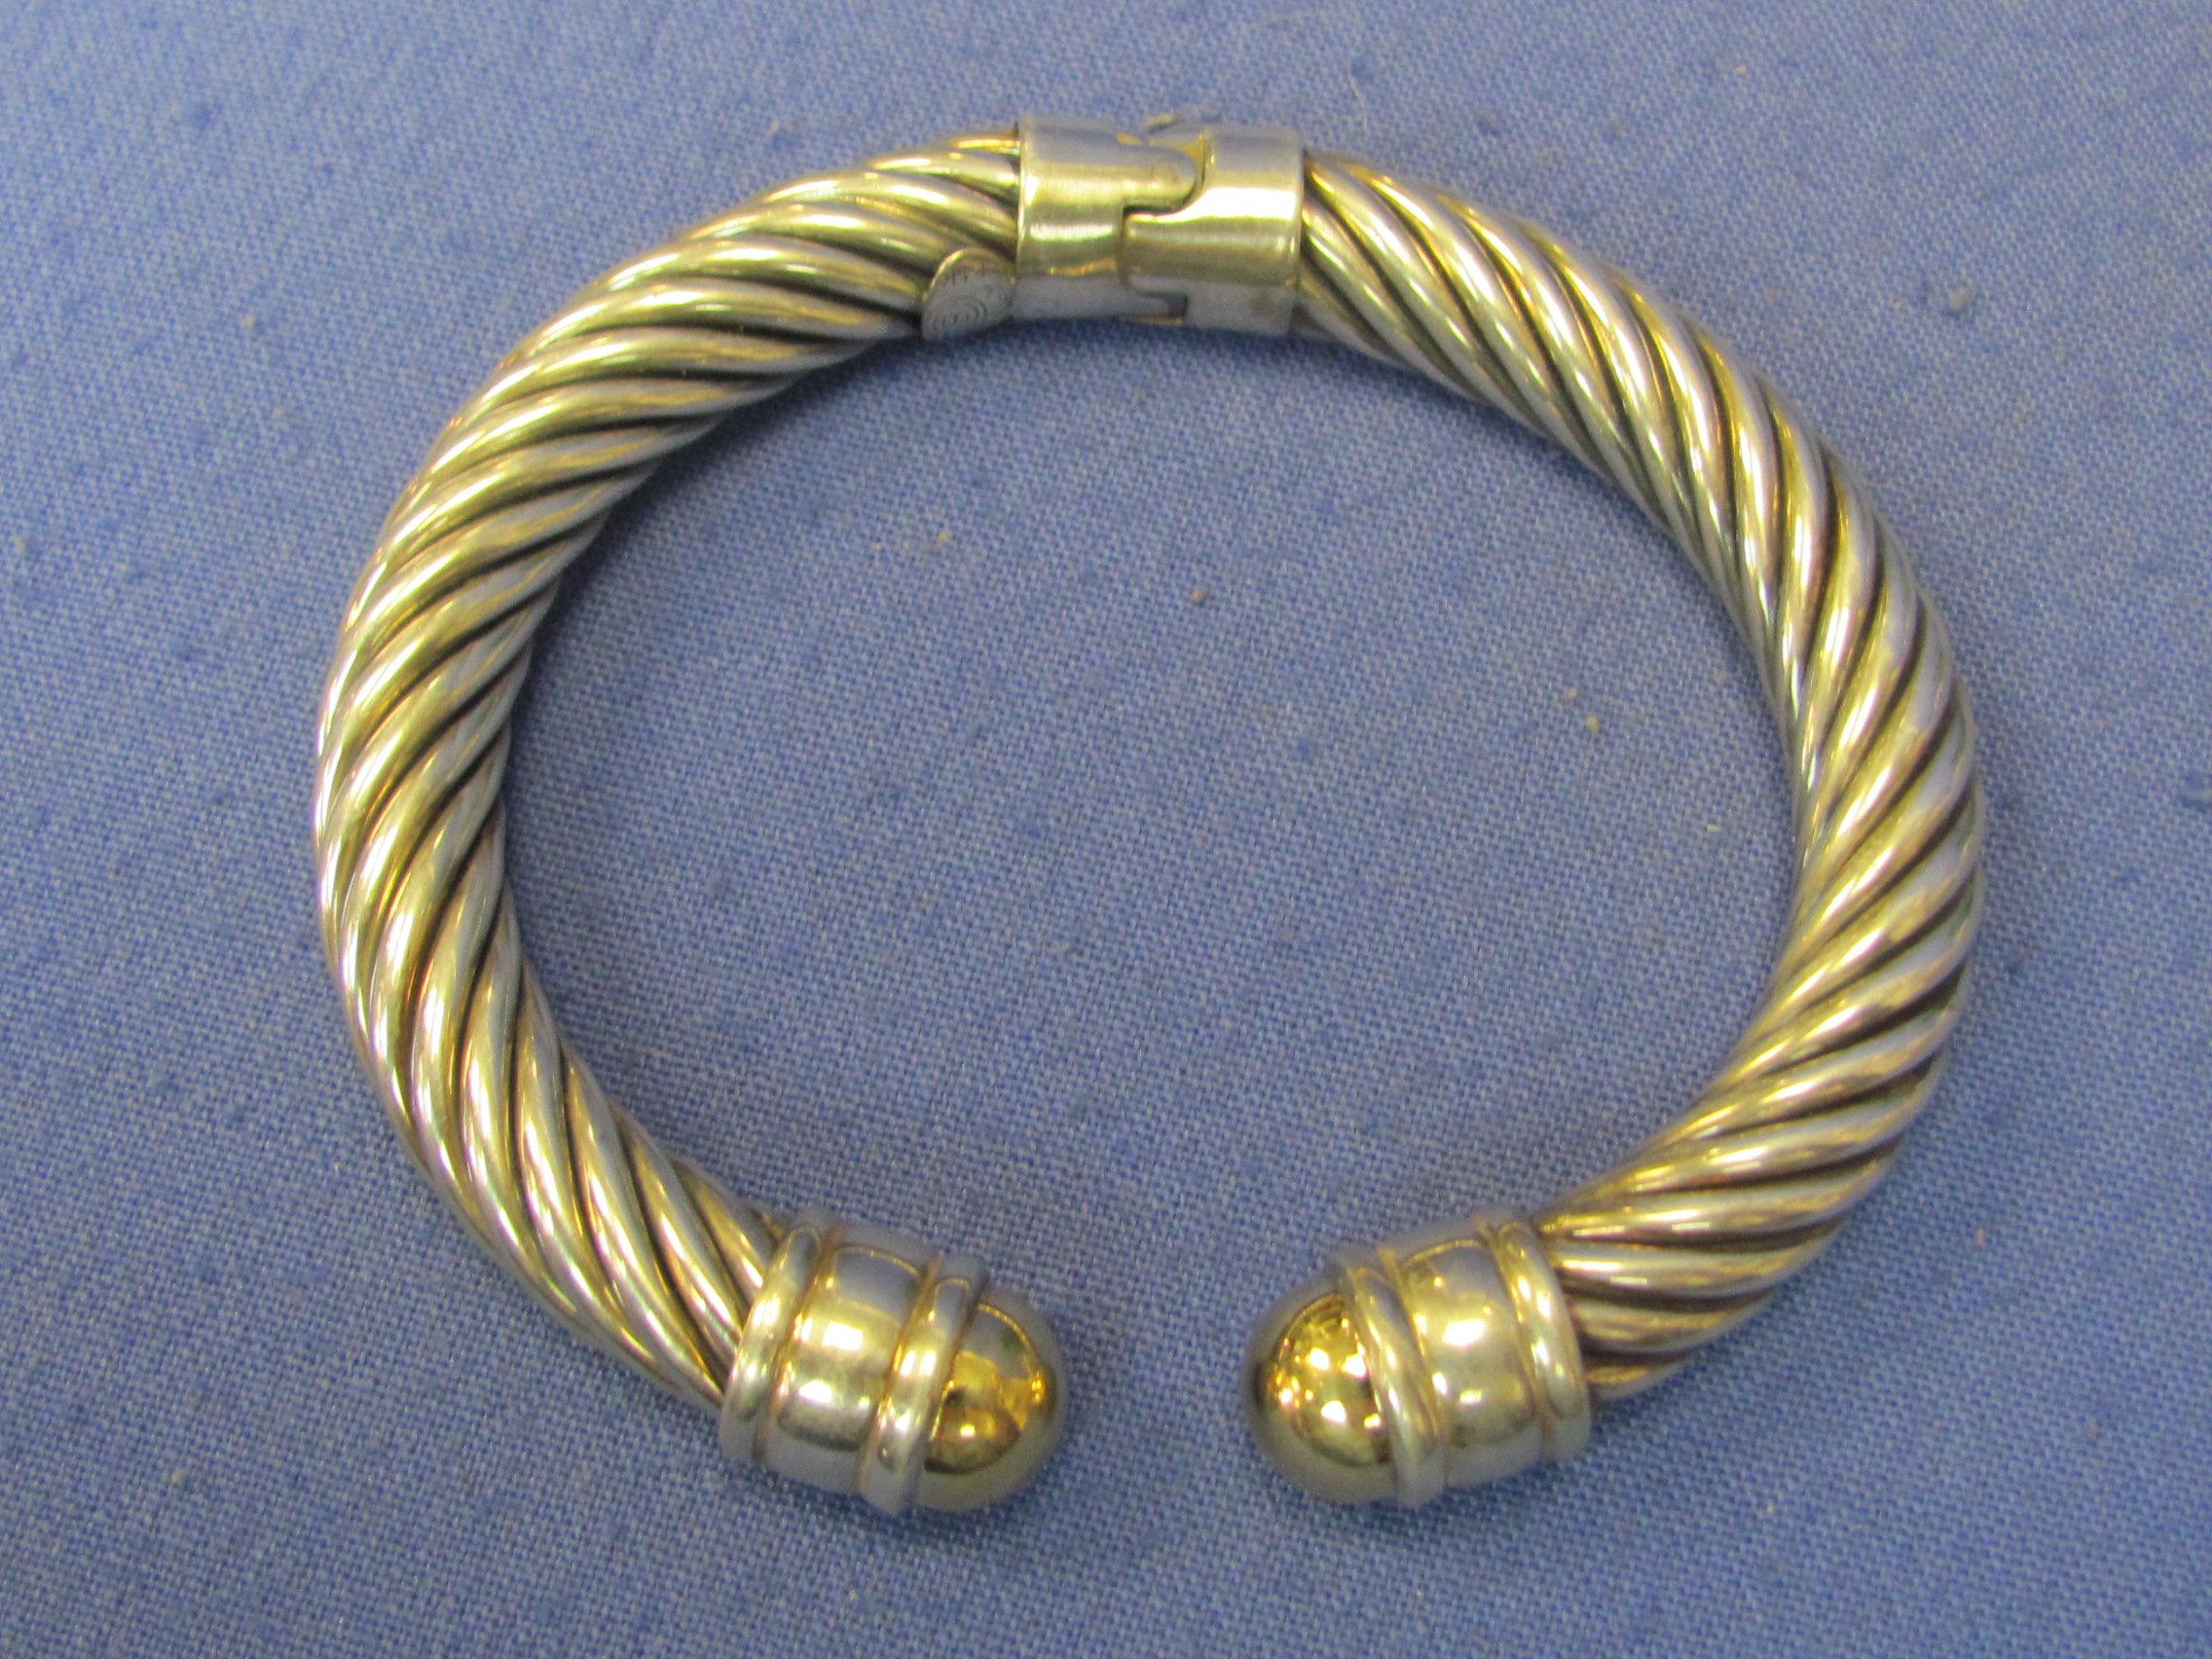 Hinged Bracelet – Sterling Silver w 14 Kt Gold Ends – Made in Italy – Weight is 35.2 grams